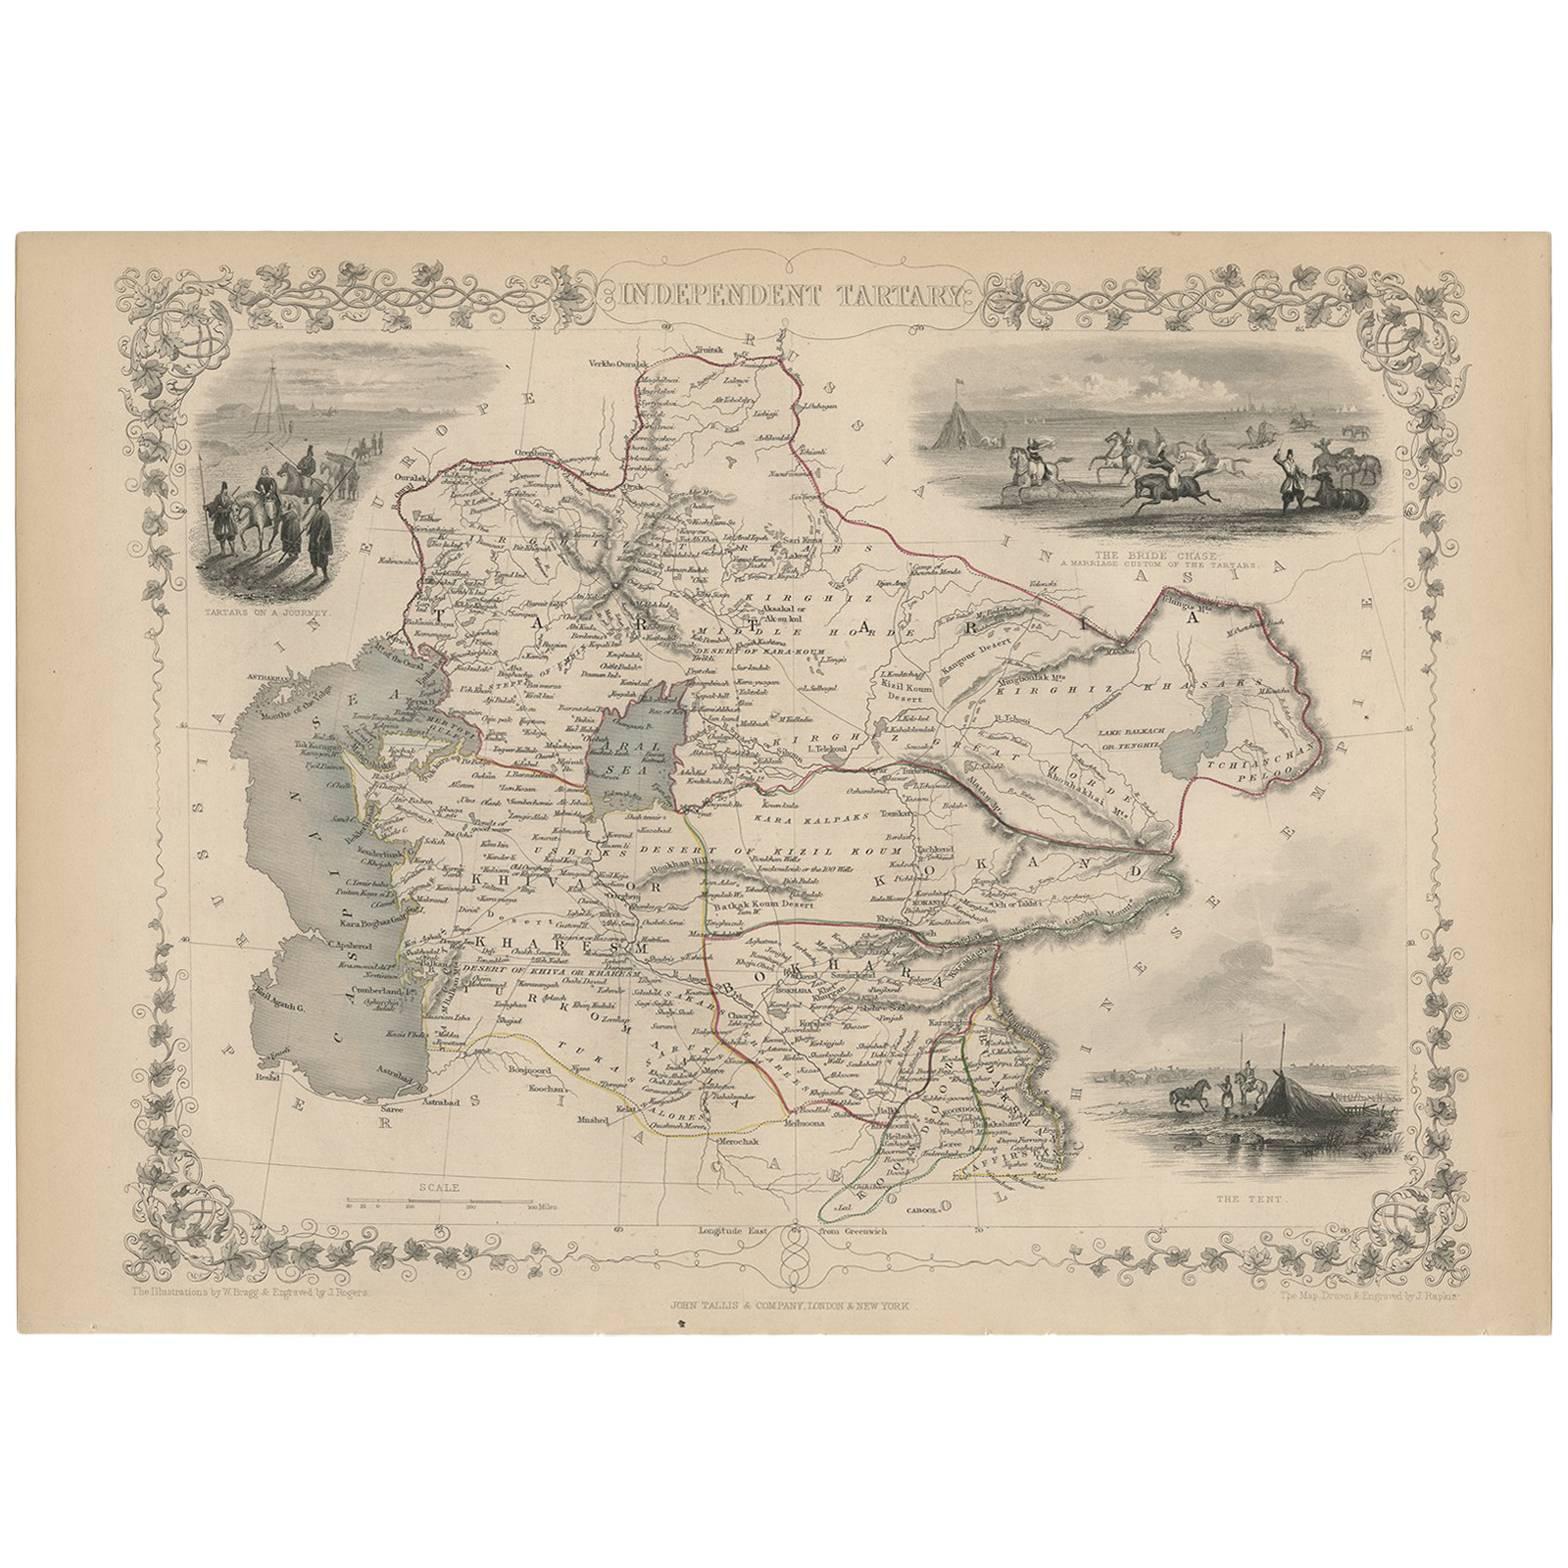 Antique Map of Independent Tartary 'Central Asia' by J. Tallis, circa 1851